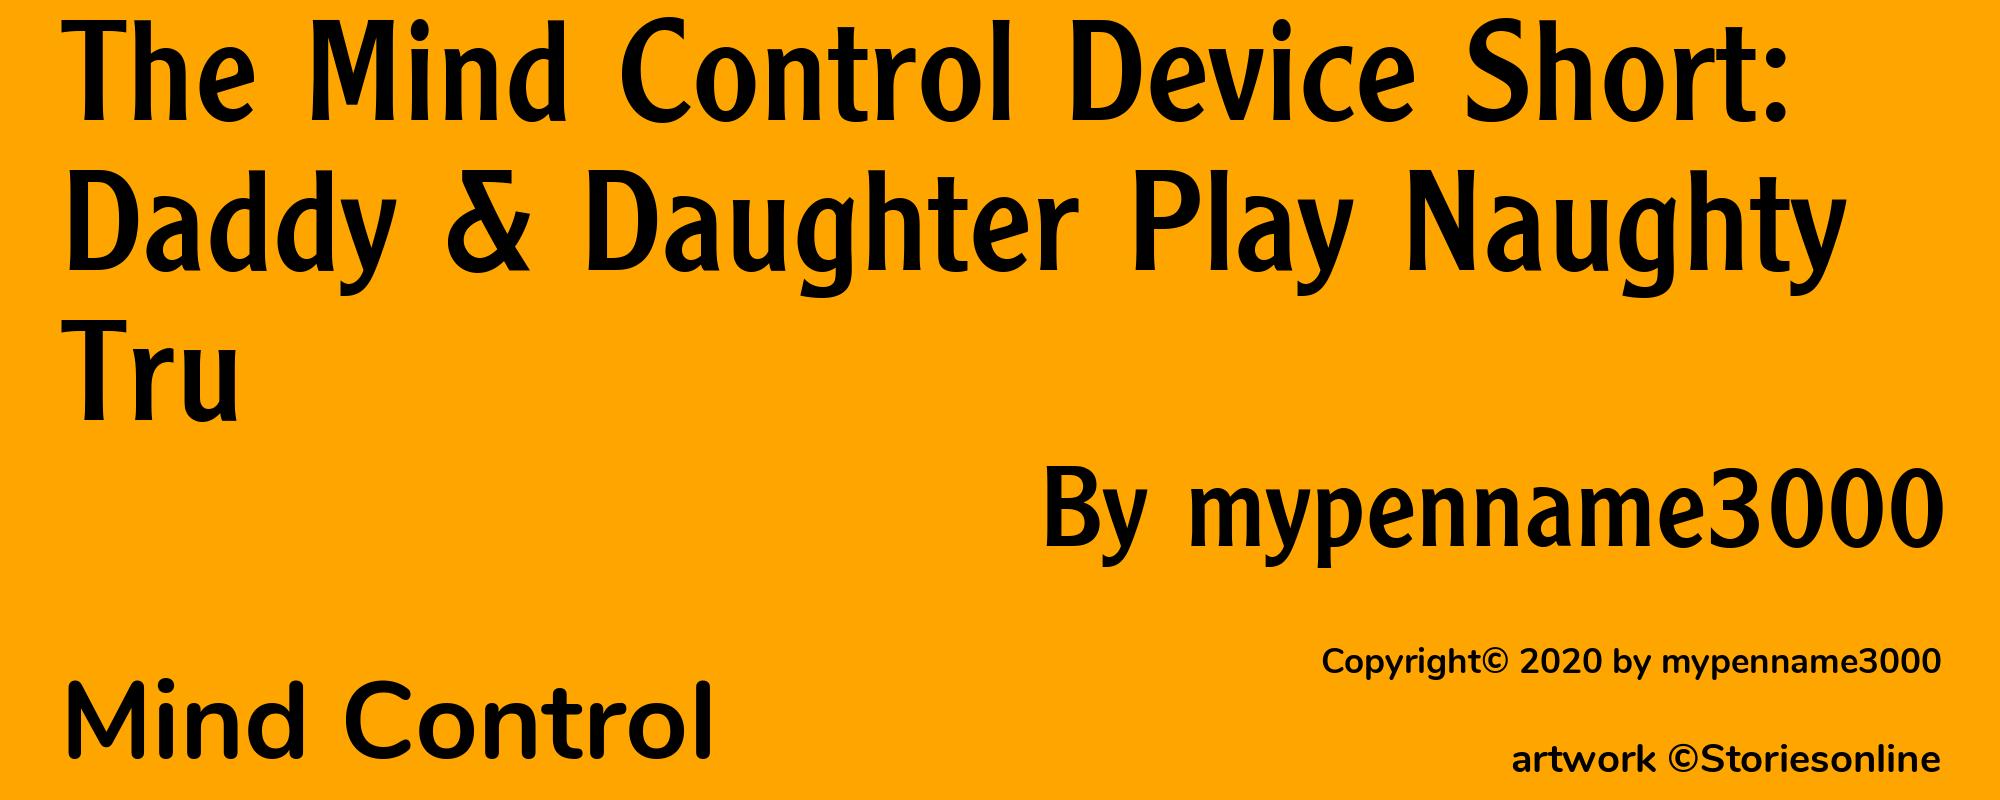 The Mind Control Device Short: Daddy & Daughter Play Naughty Tru - Cover